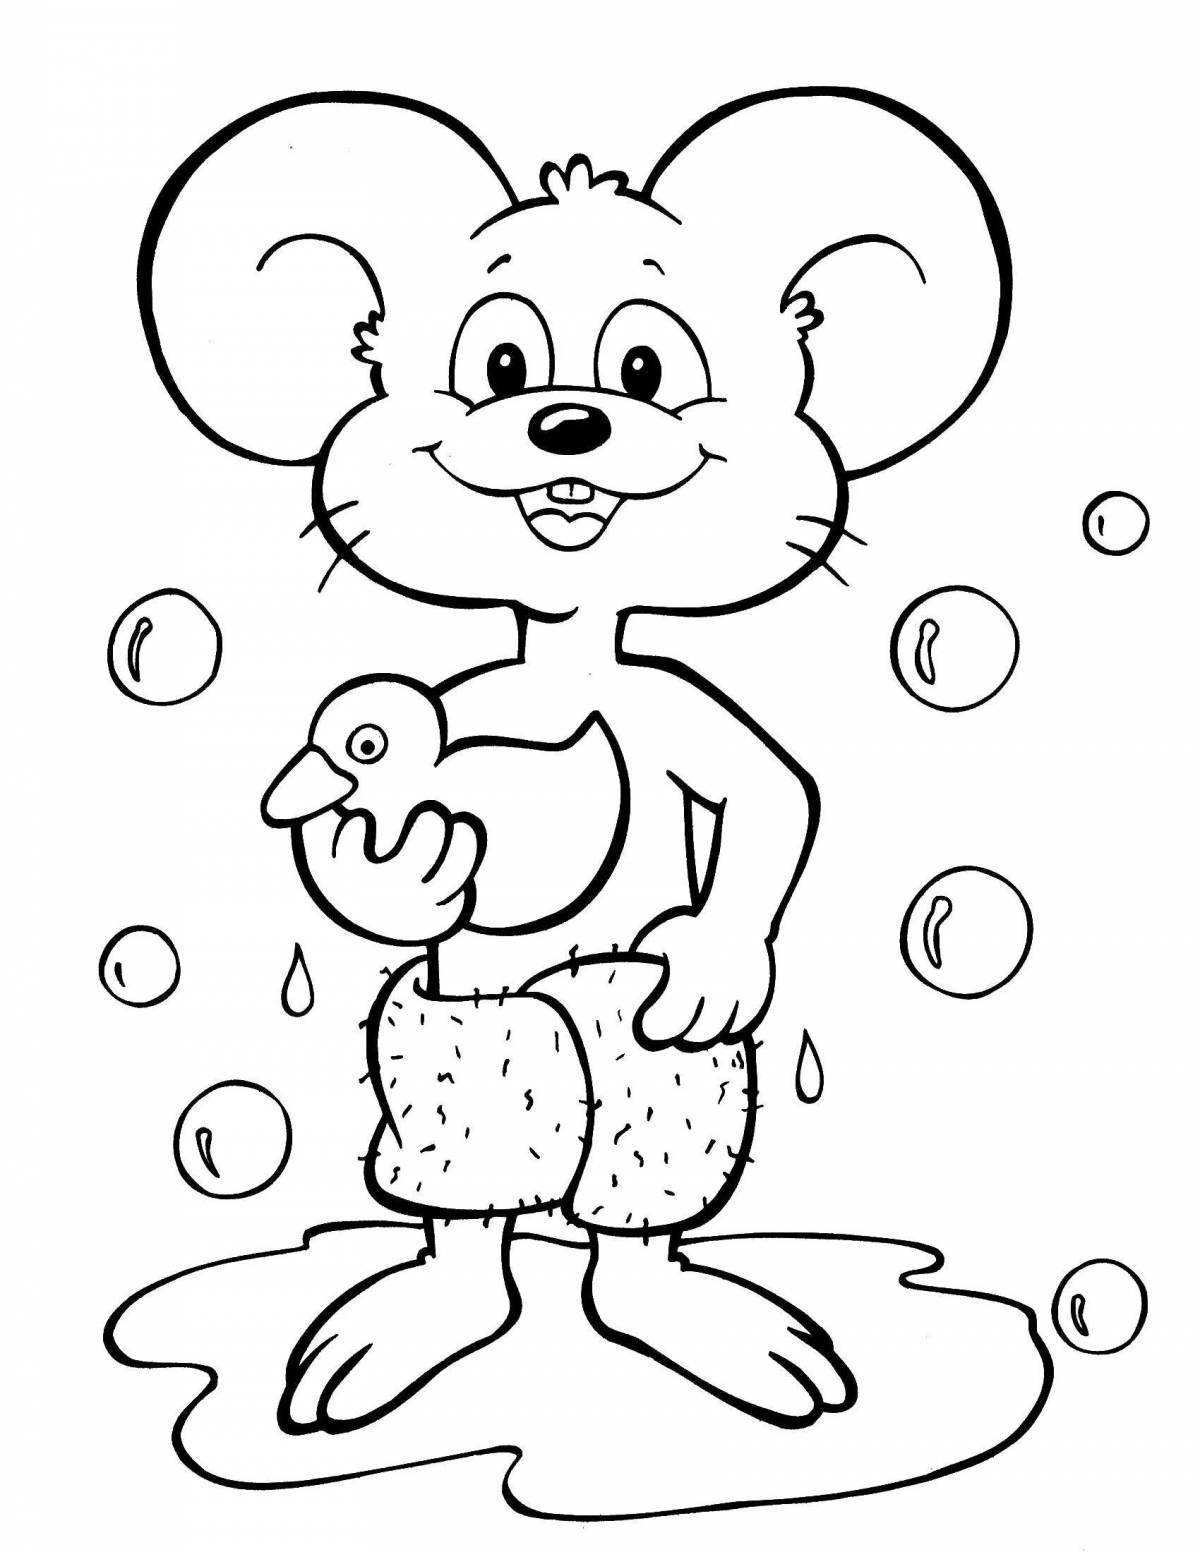 Joyful mouse coloring book for 3-4 year olds